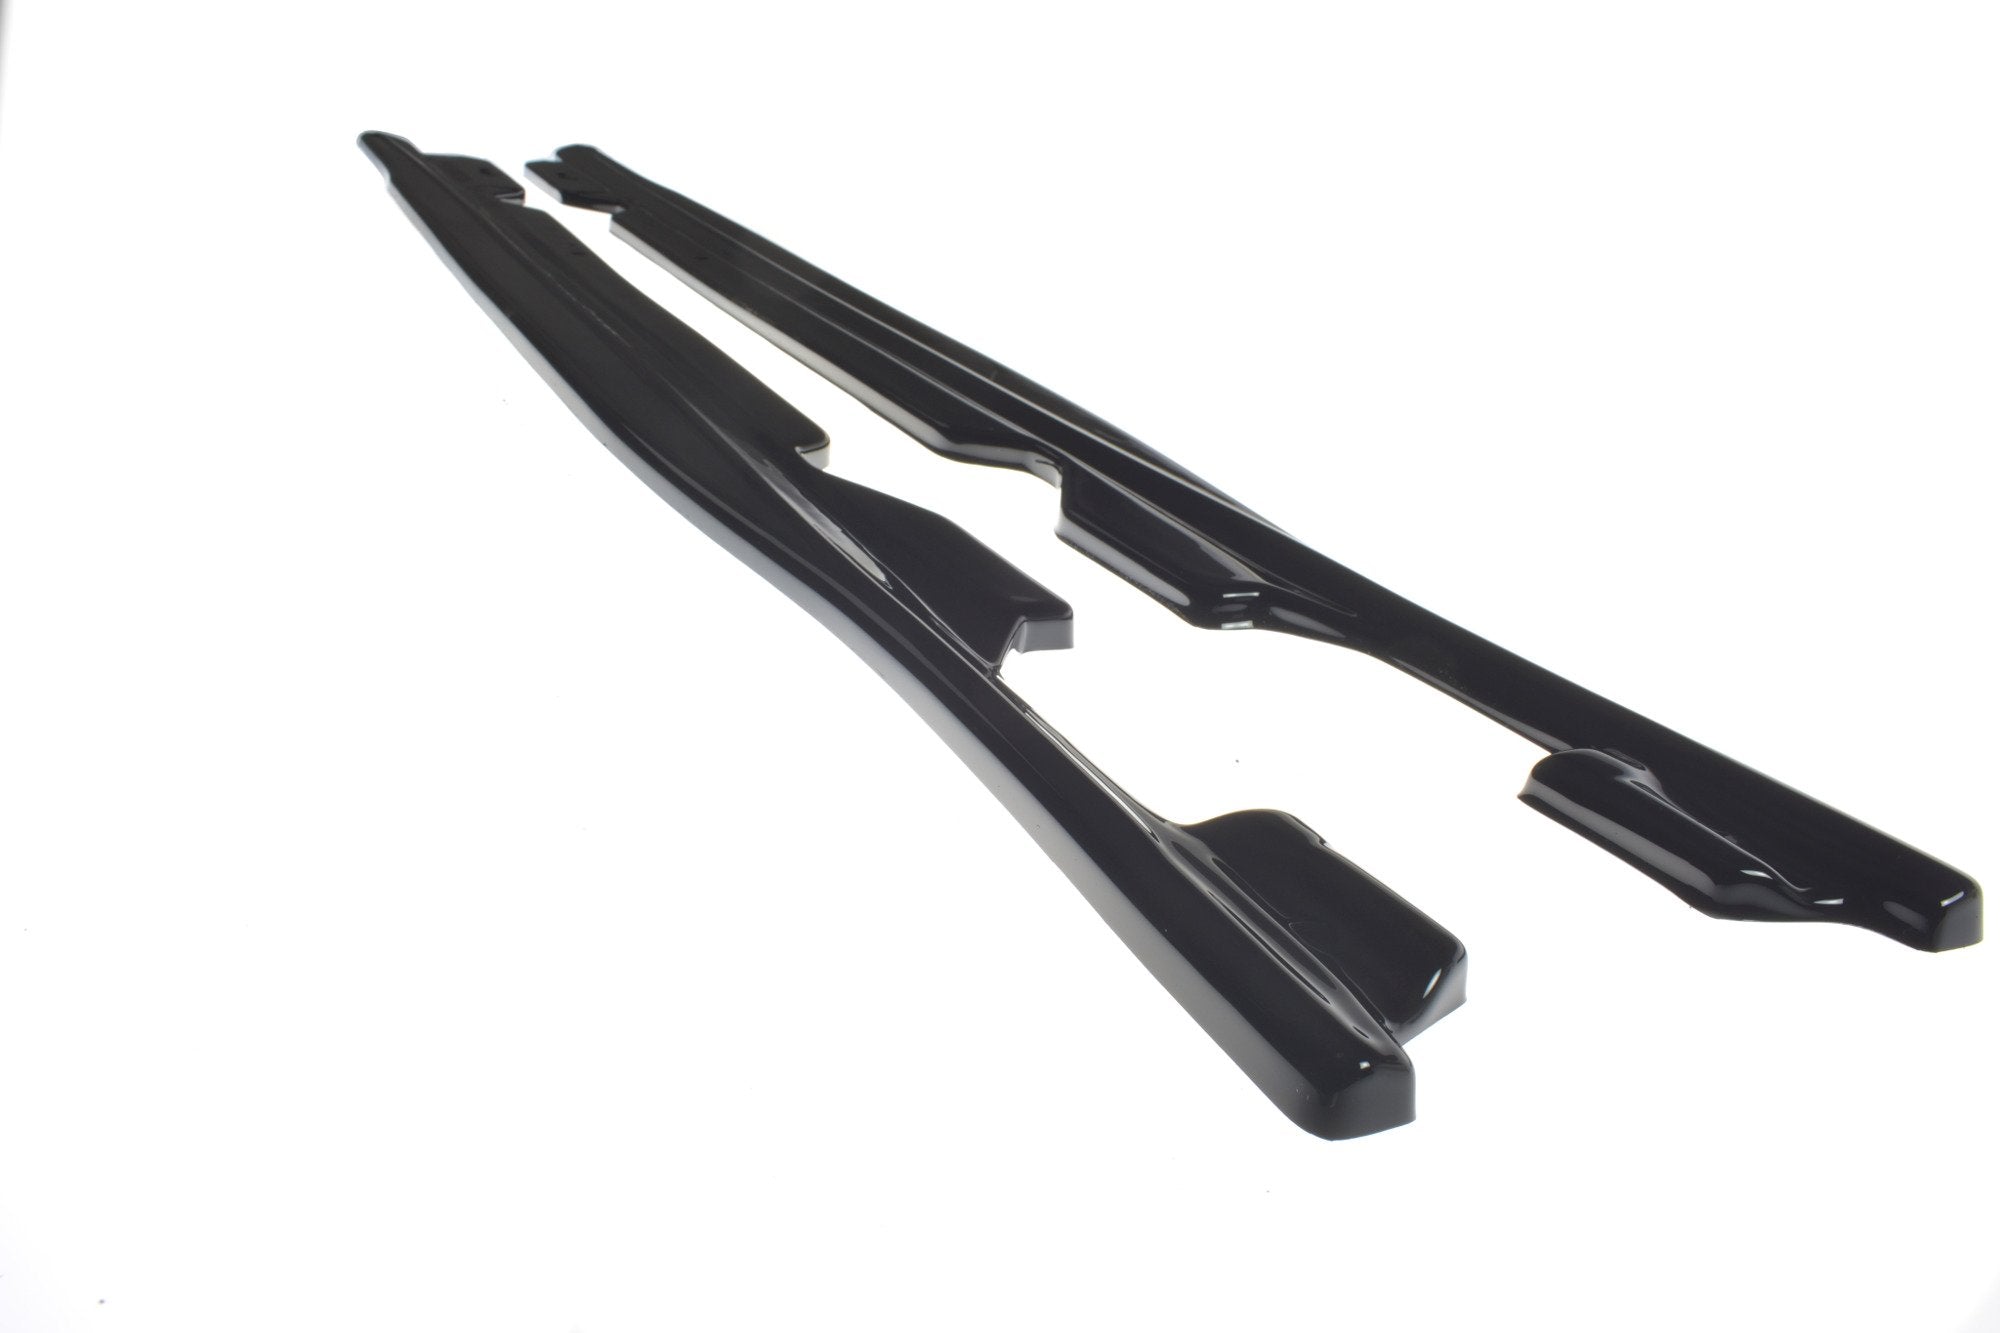 SIDE SKIRTS DIFFUSERS for BMW 3 G20 M-pack